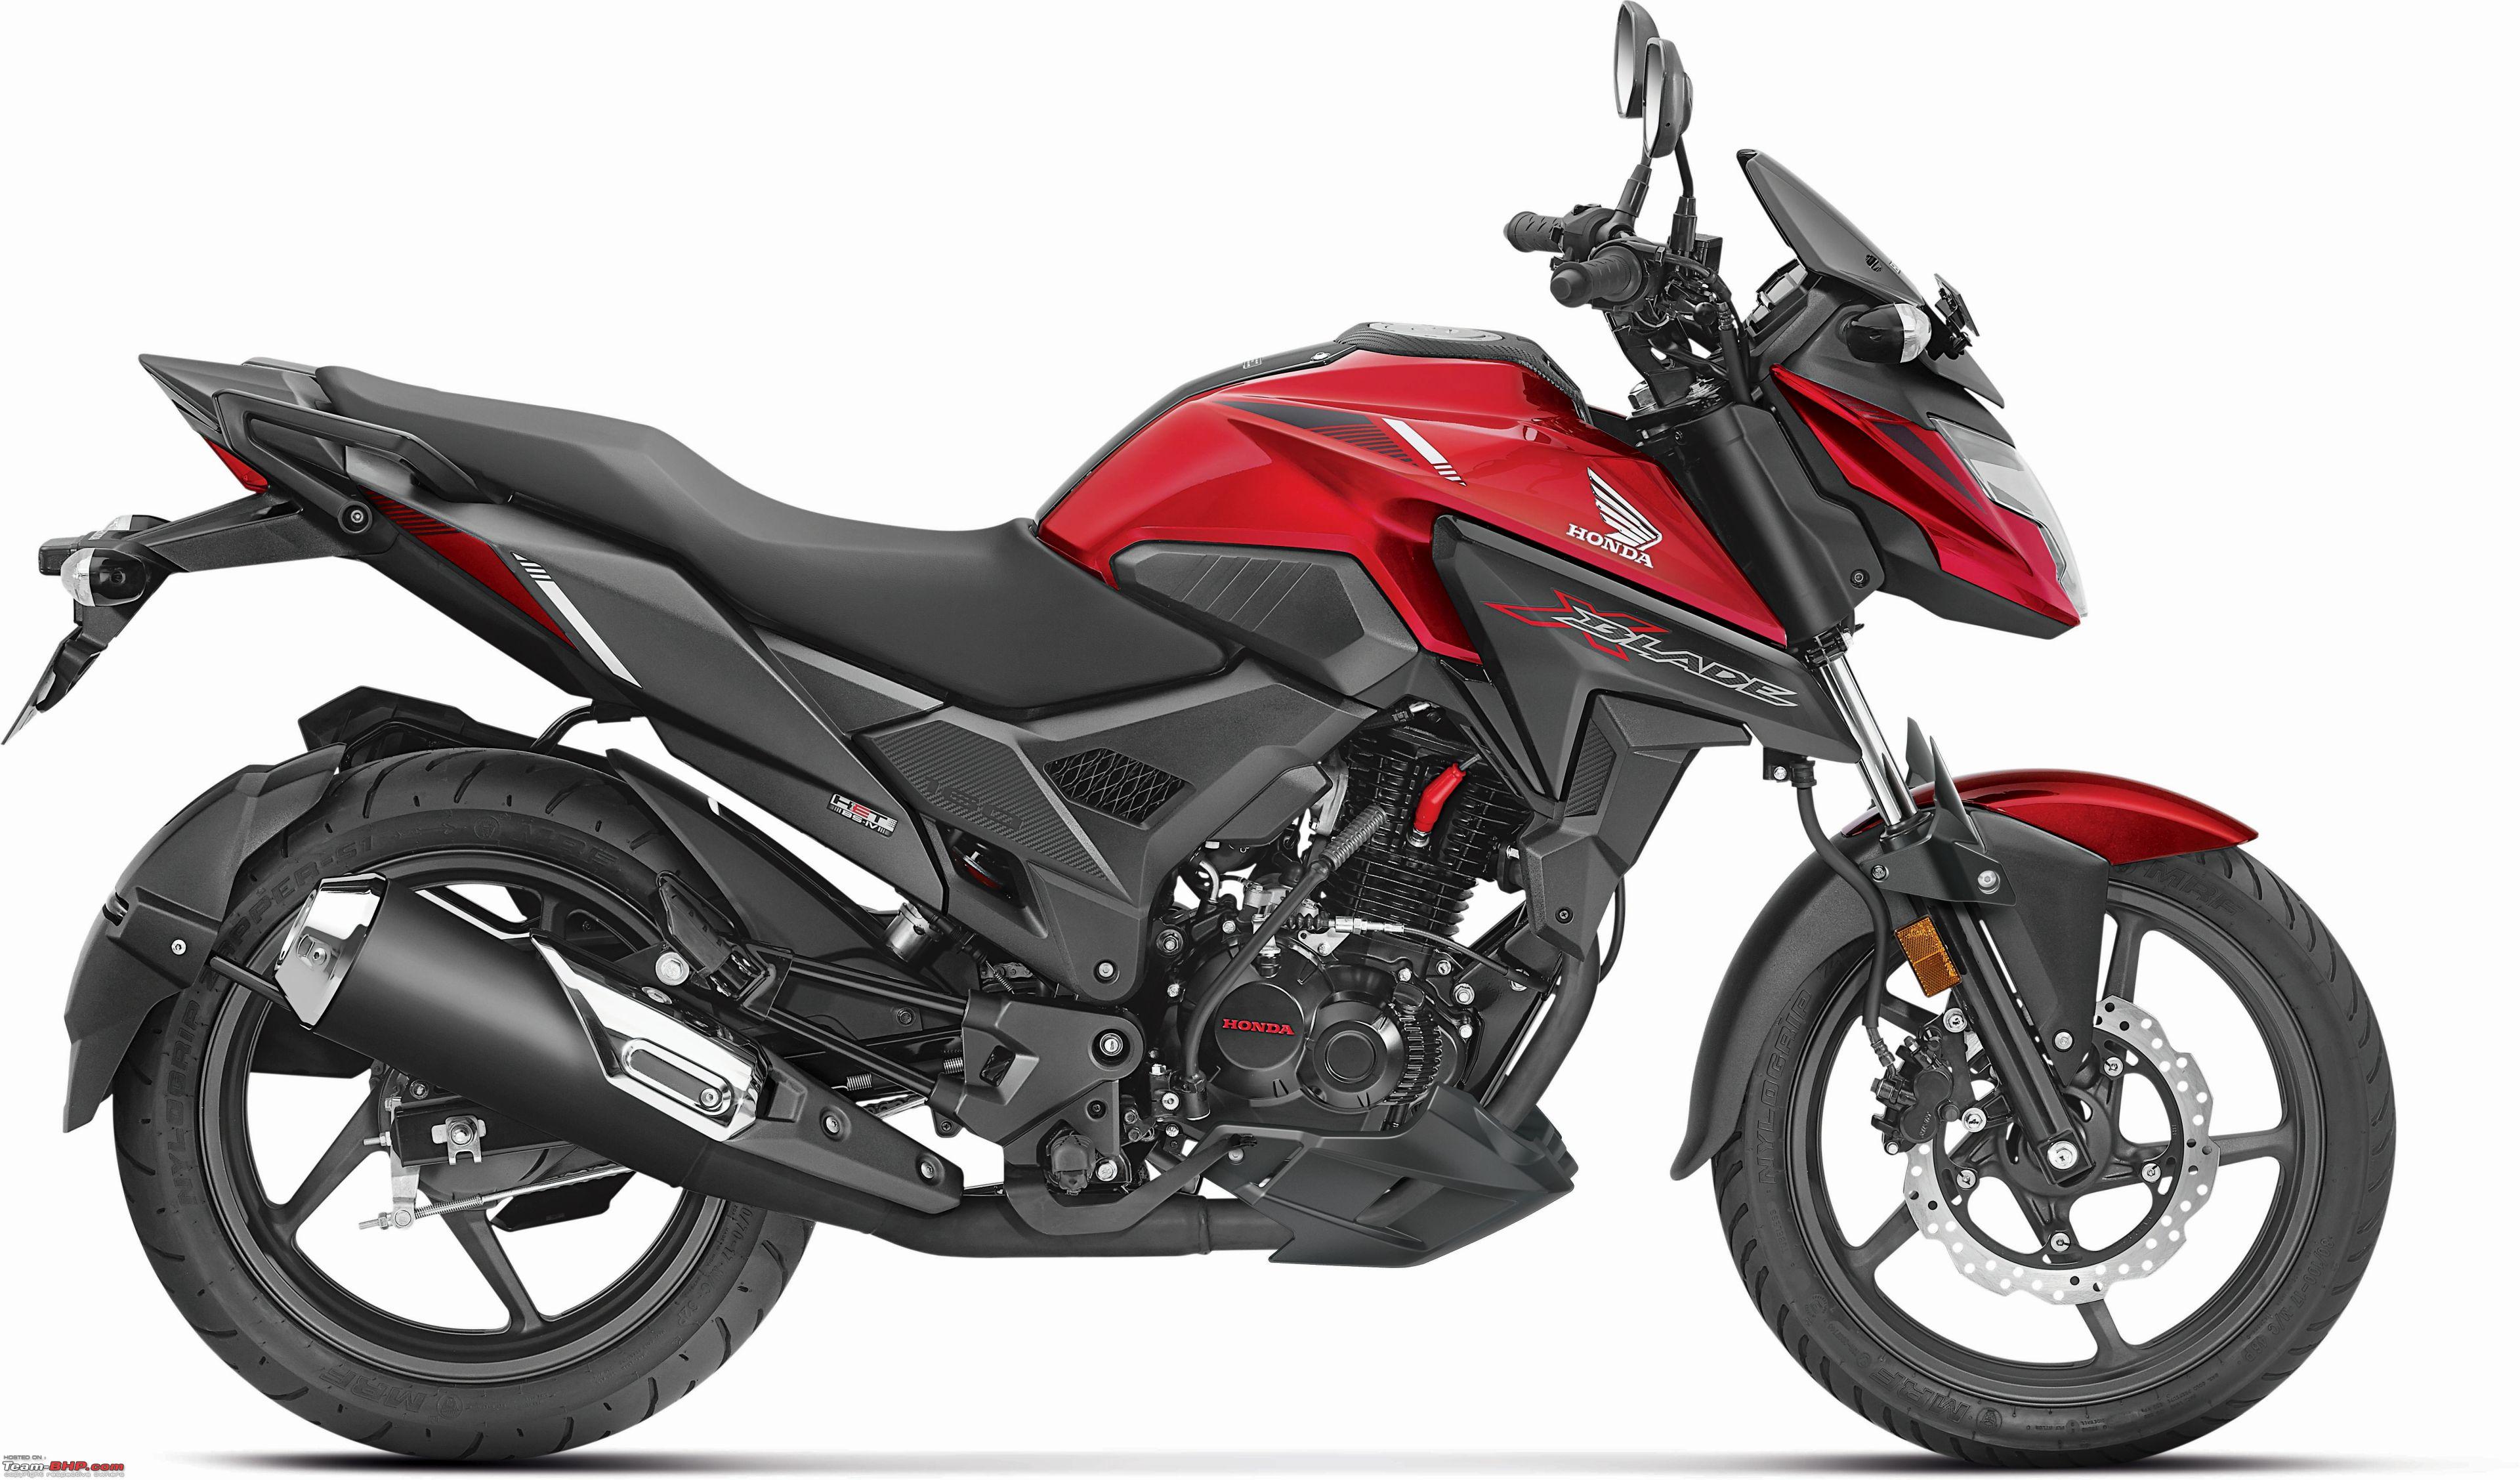 Honda XBlade 160 cc motorcycle bookings open. EDIT Now launched at Rs